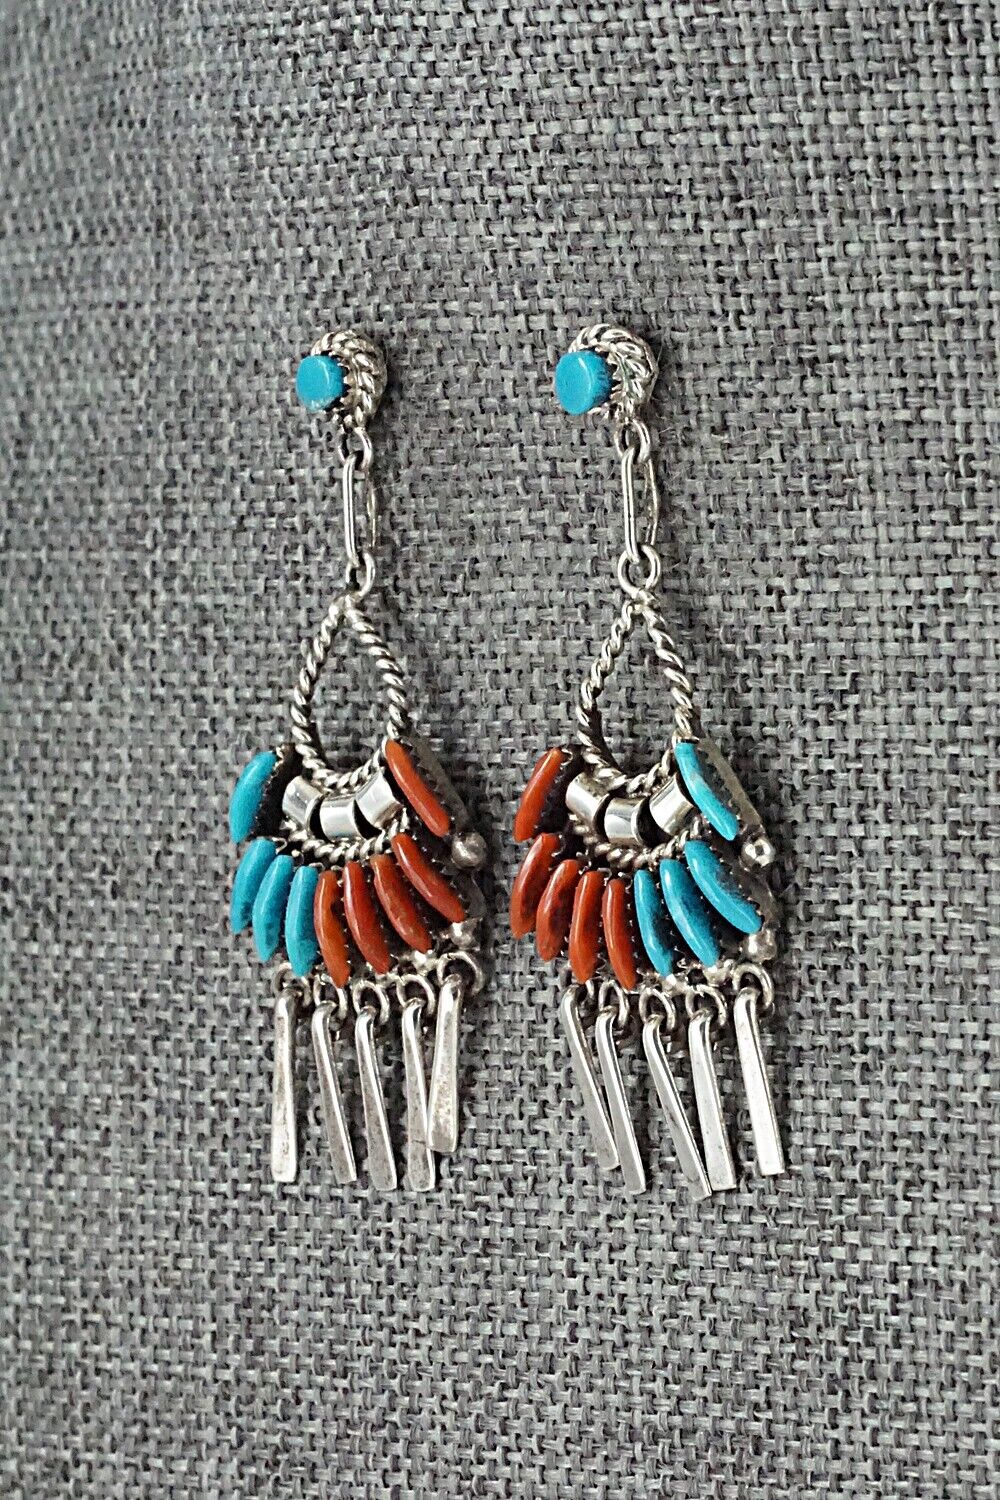 Turquoise, Coral & Sterling Silver Earrings - Edmund Cooeyate